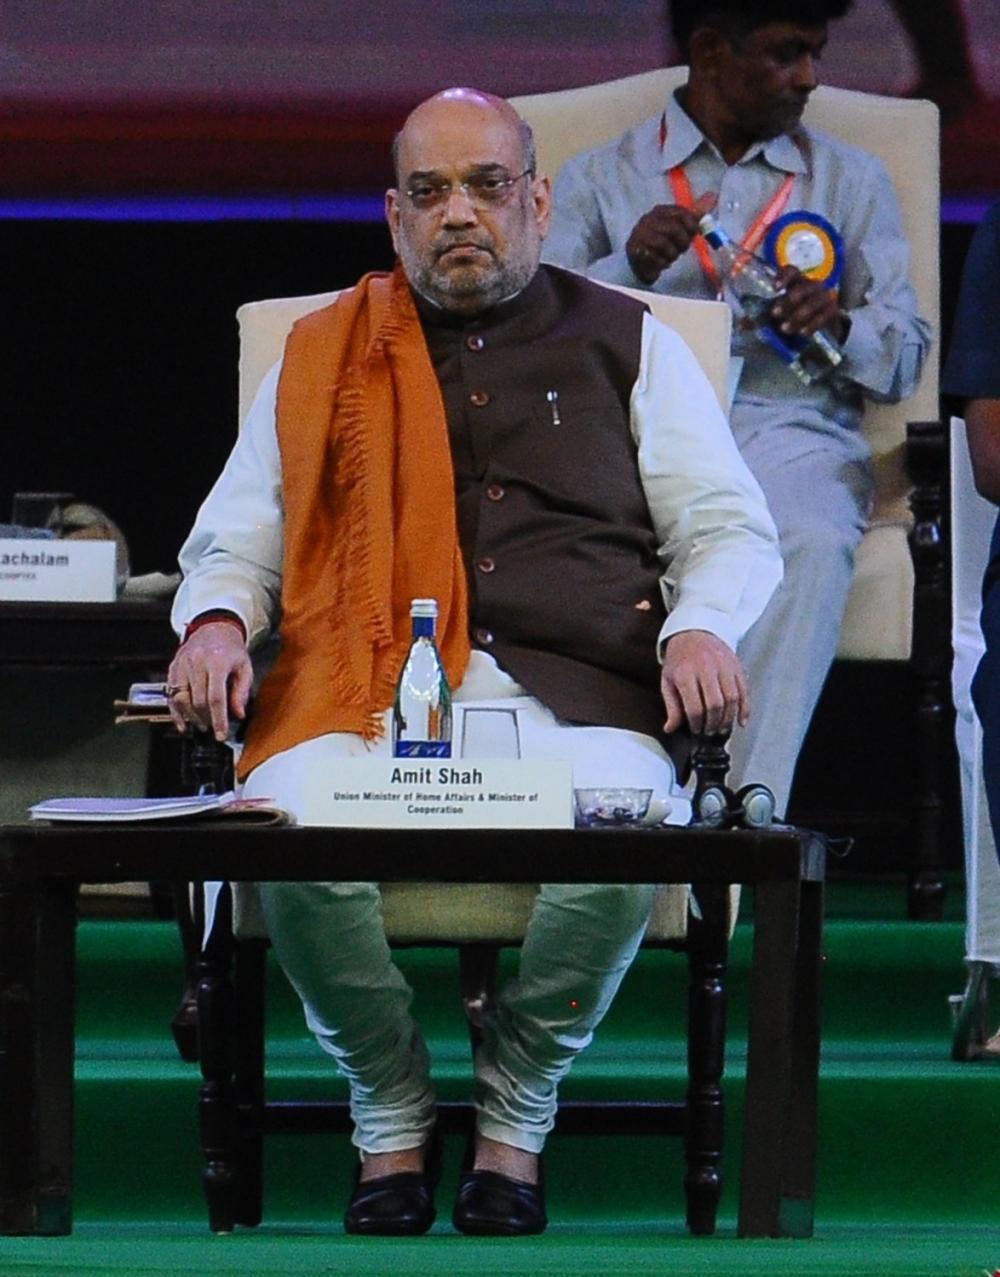 The Weekend Leader - Centre to bring new cooperative policy soon: Amit Shah